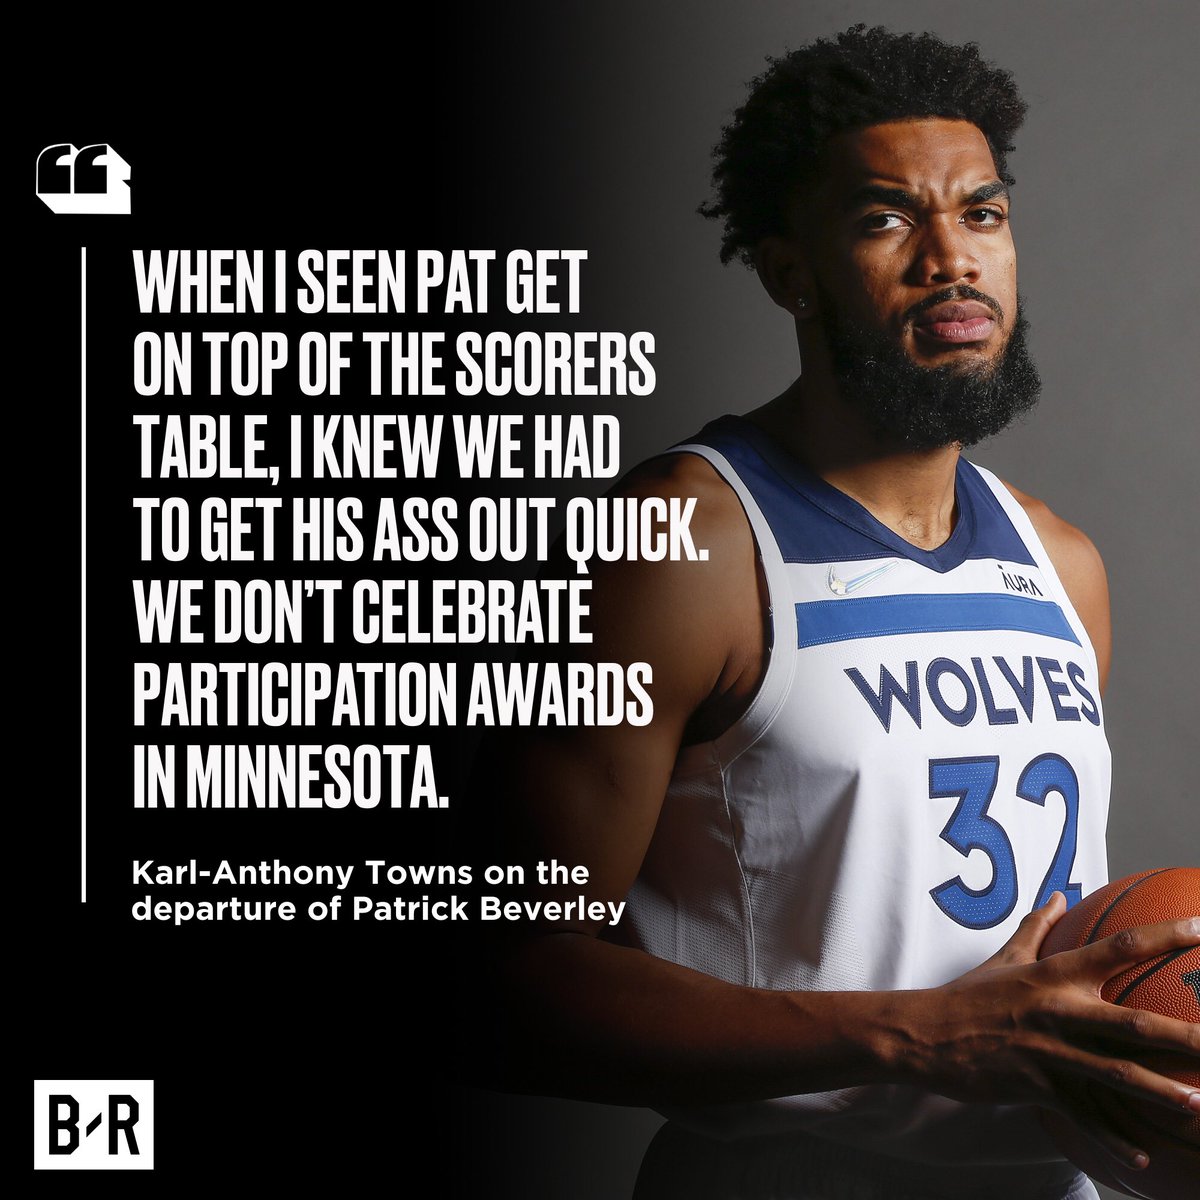 Karl-Anthony Towns had this to say about Patrick Beverley being traded 👀